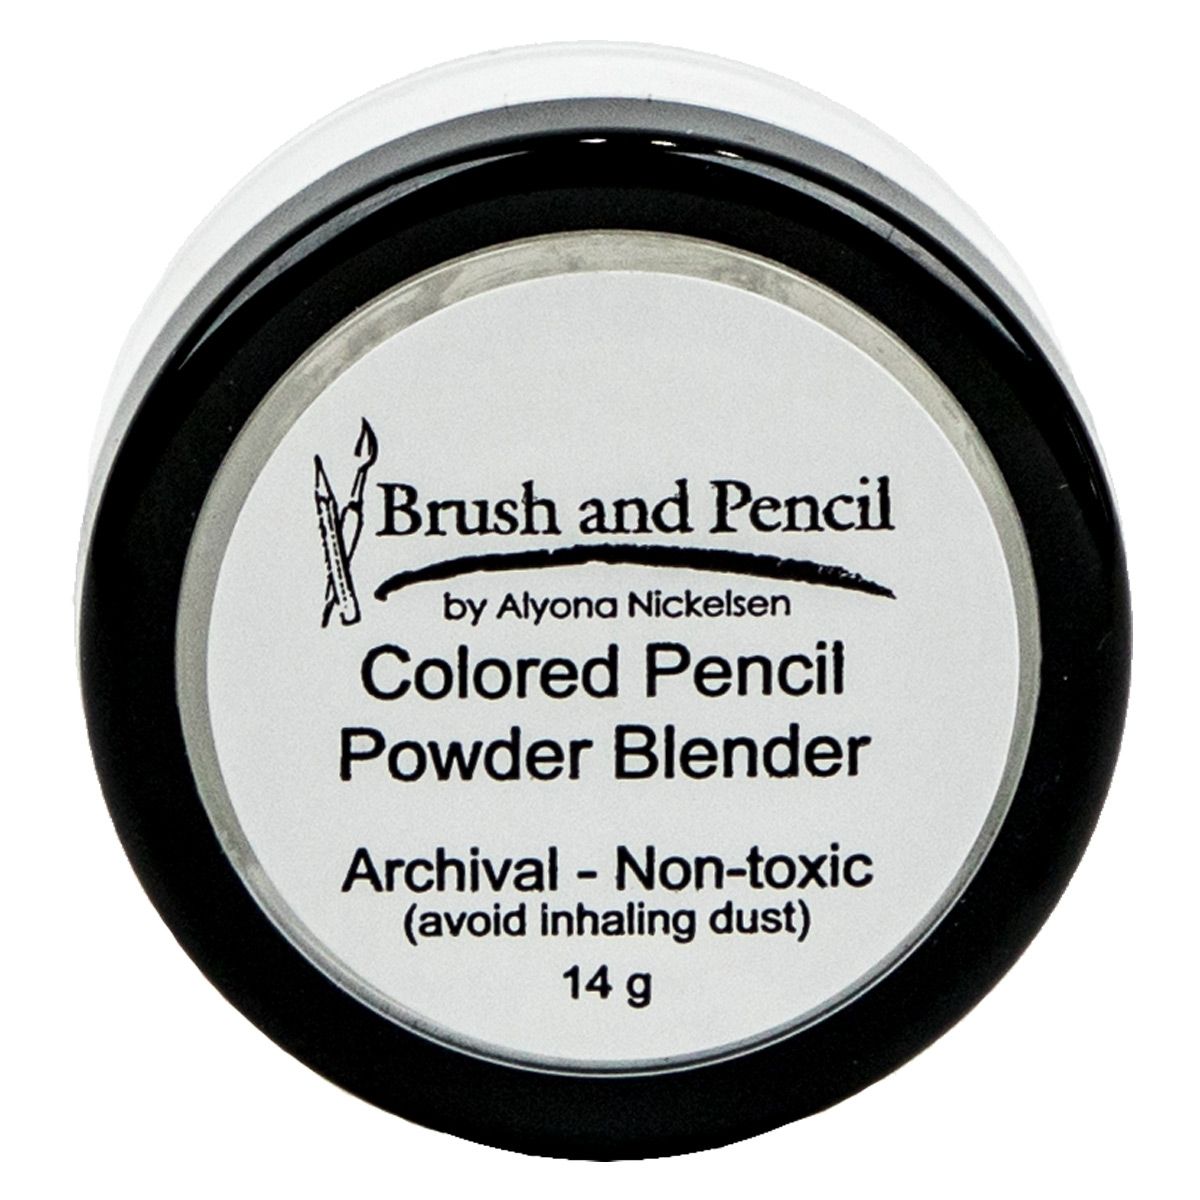 Brush and Pencil Colored Pencil Powder Blender